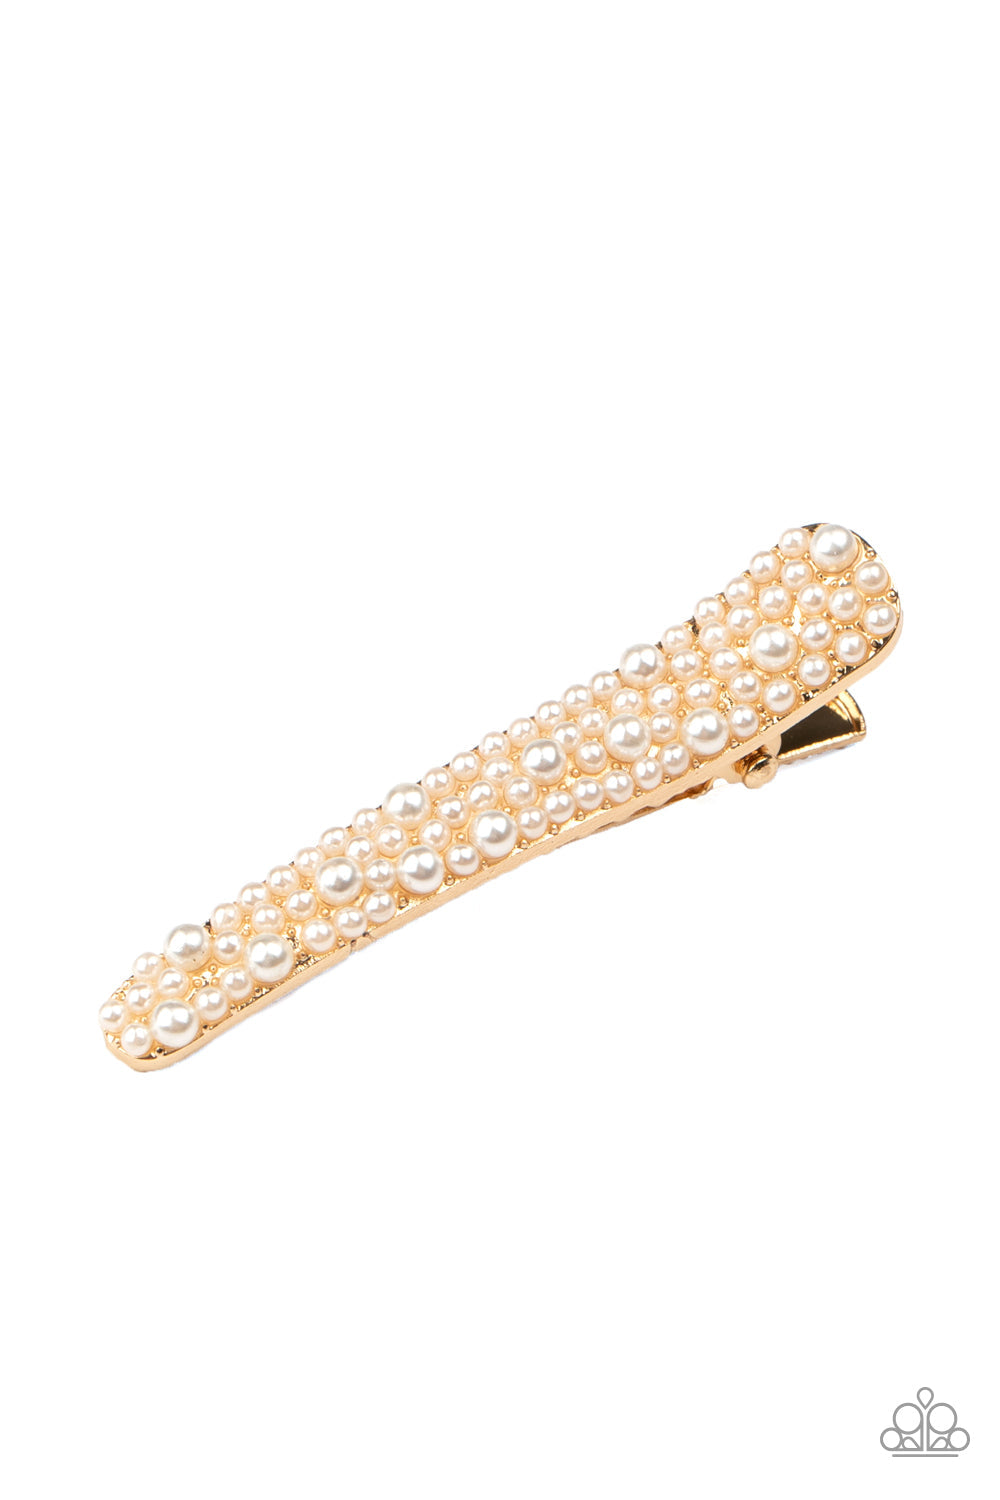 Paparazzi Wish You Were HAIR - Gold - White Pearls - Hair Clip - $5 Jewelry with Ashley Swint